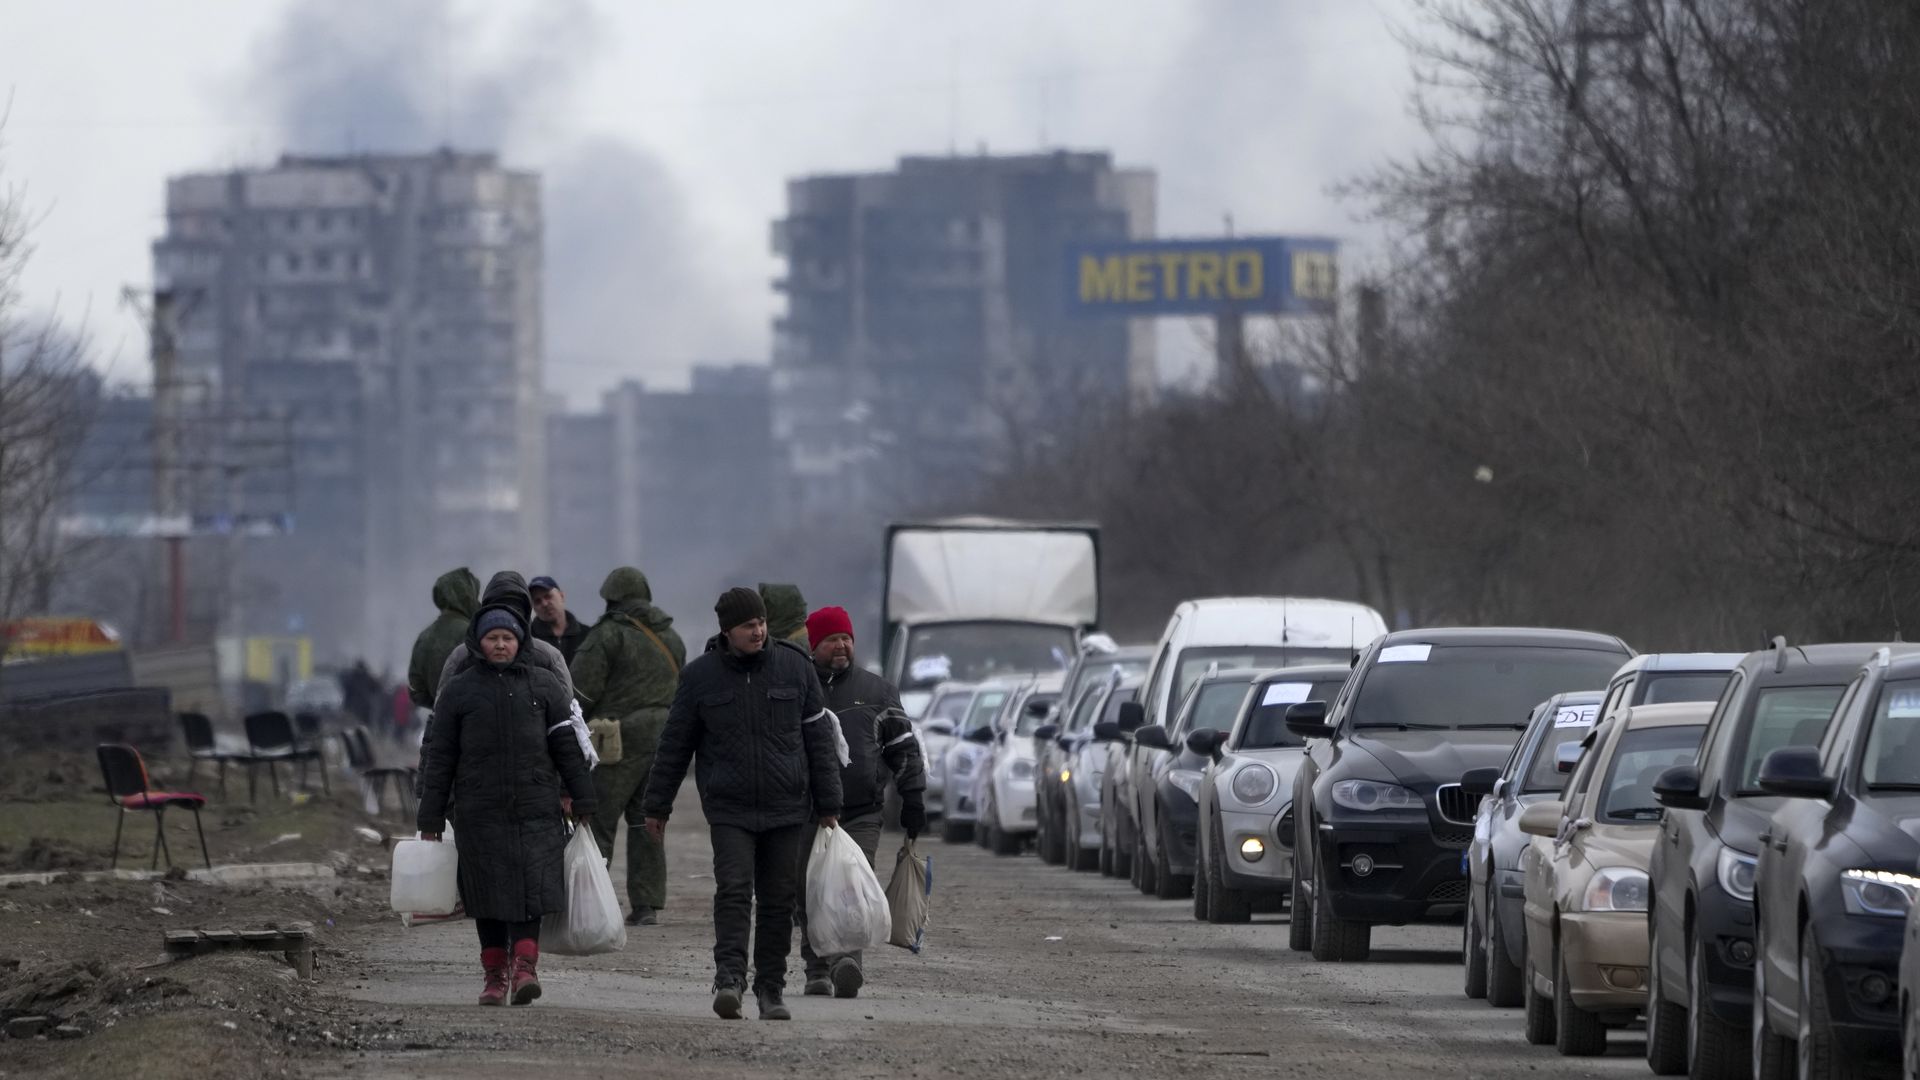 Civilians trapped in Mariupol city under Russian attacks, are evacuated in groups under the control of pro-Russian separatists, through other cities, in Mariupol, Ukraine on March 20.